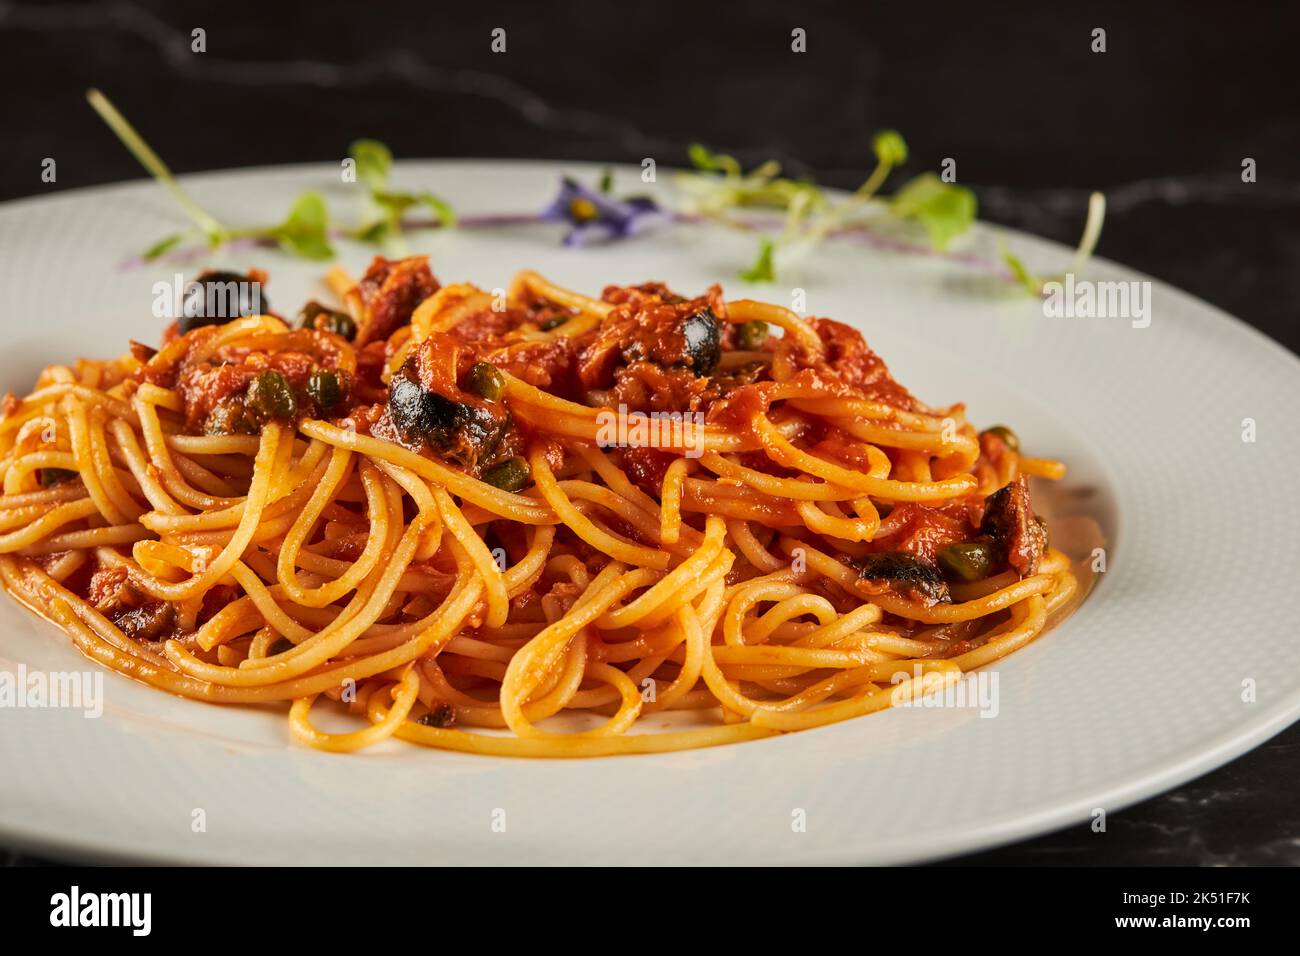 Closeup yummy spaghetti alla puttanesca dish with tomato sauce and seafood garnished with garlic and chili pepper and served on plate in Italian resta Stock Photo